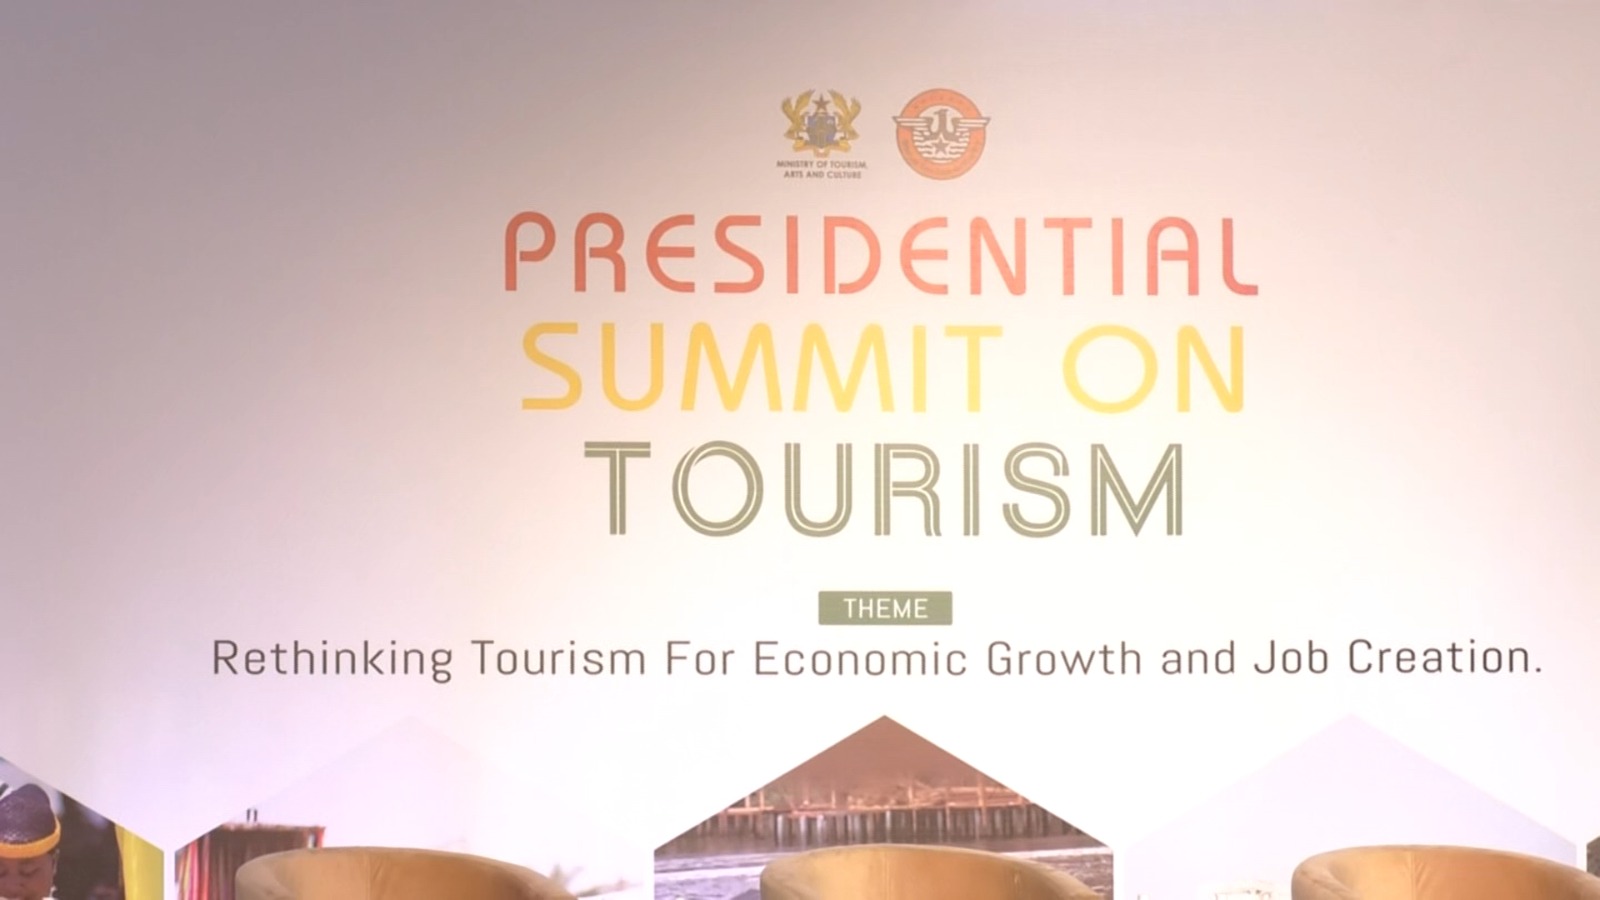 Ghana Tourism Authority hosts inaugural presidential summit on tourism